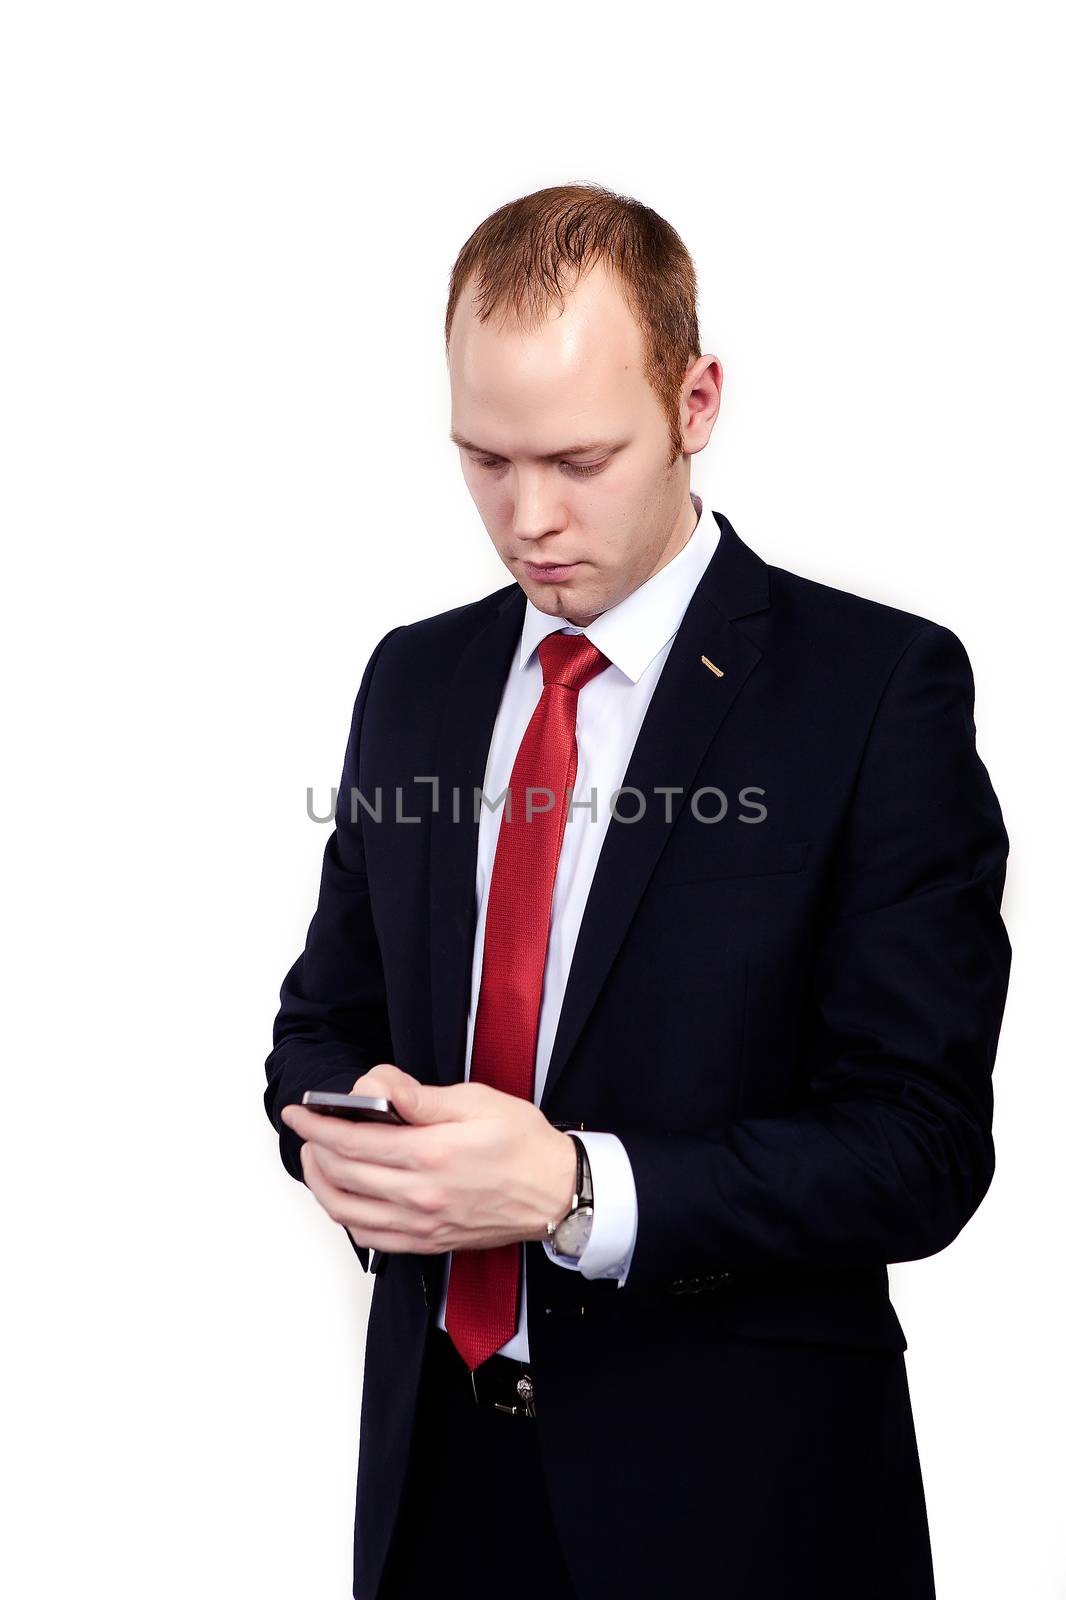 Boss with a red tie reads the message on your mobile phone. On an isolated white background.